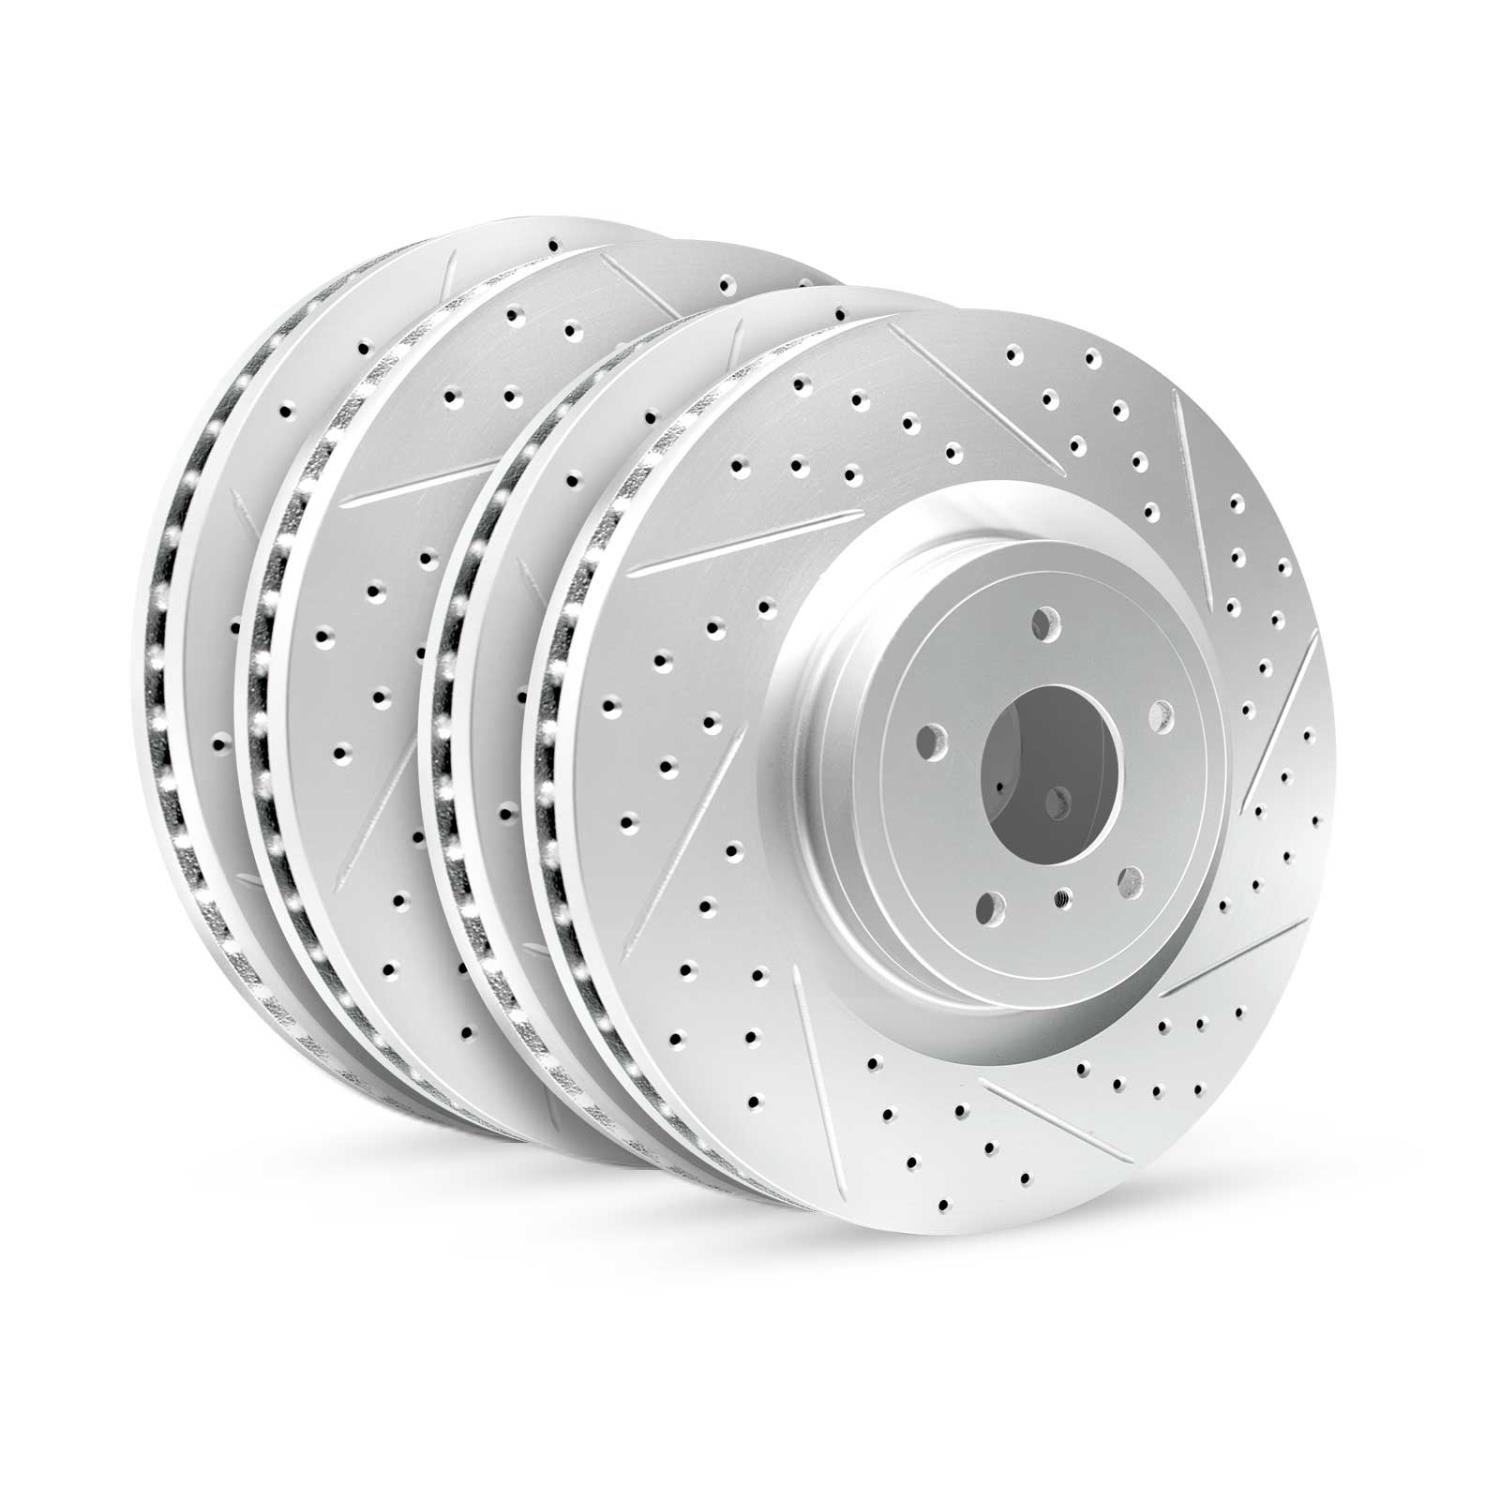 GEO-Carbon Drilled/Slotted Rotors, 2012-2017 Lexus/Toyota/Scion,